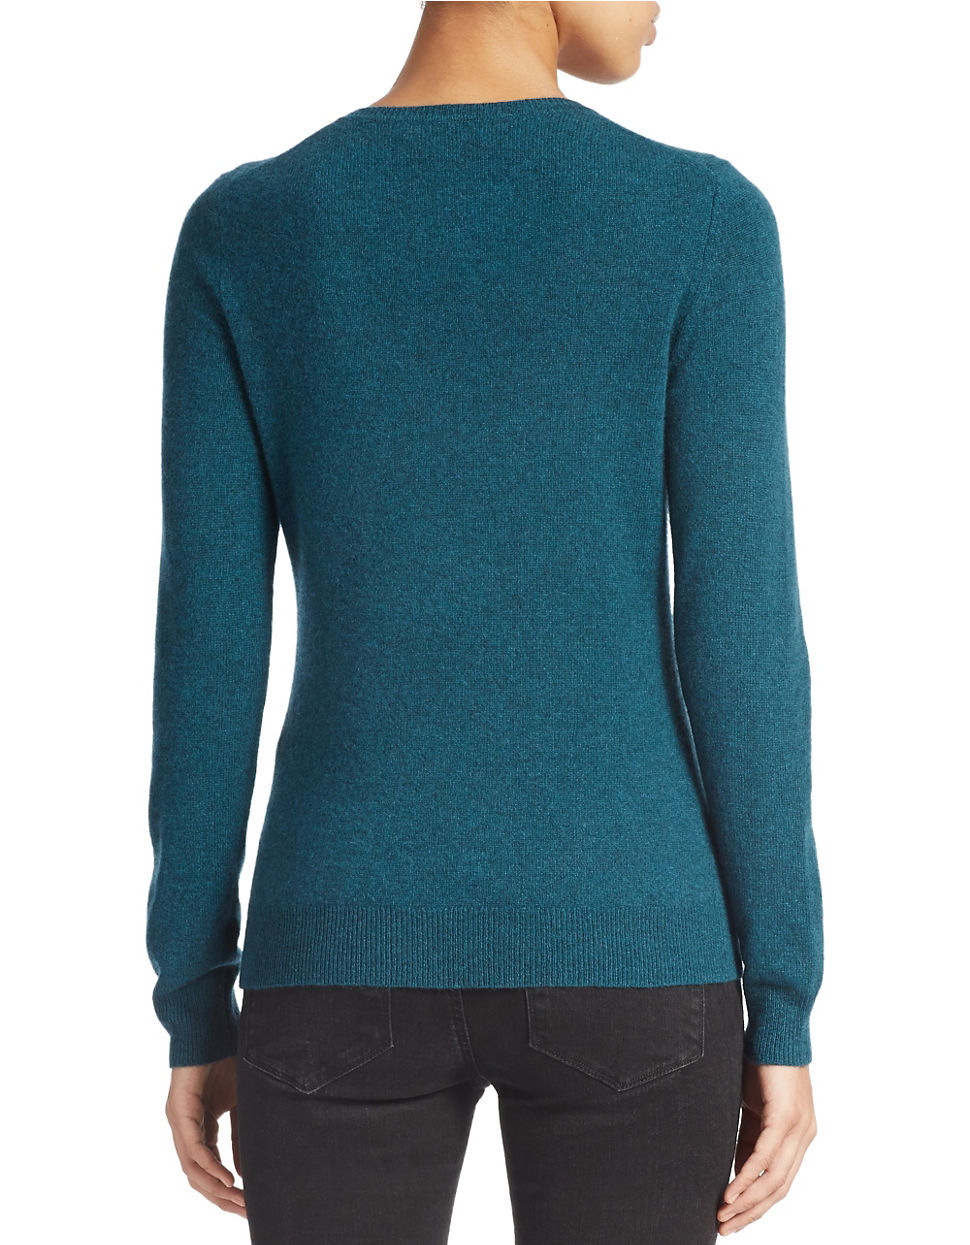 Lord & taylor Basic Crewneck Cashmere Sweater in Blue (Teal Heather) | Lyst